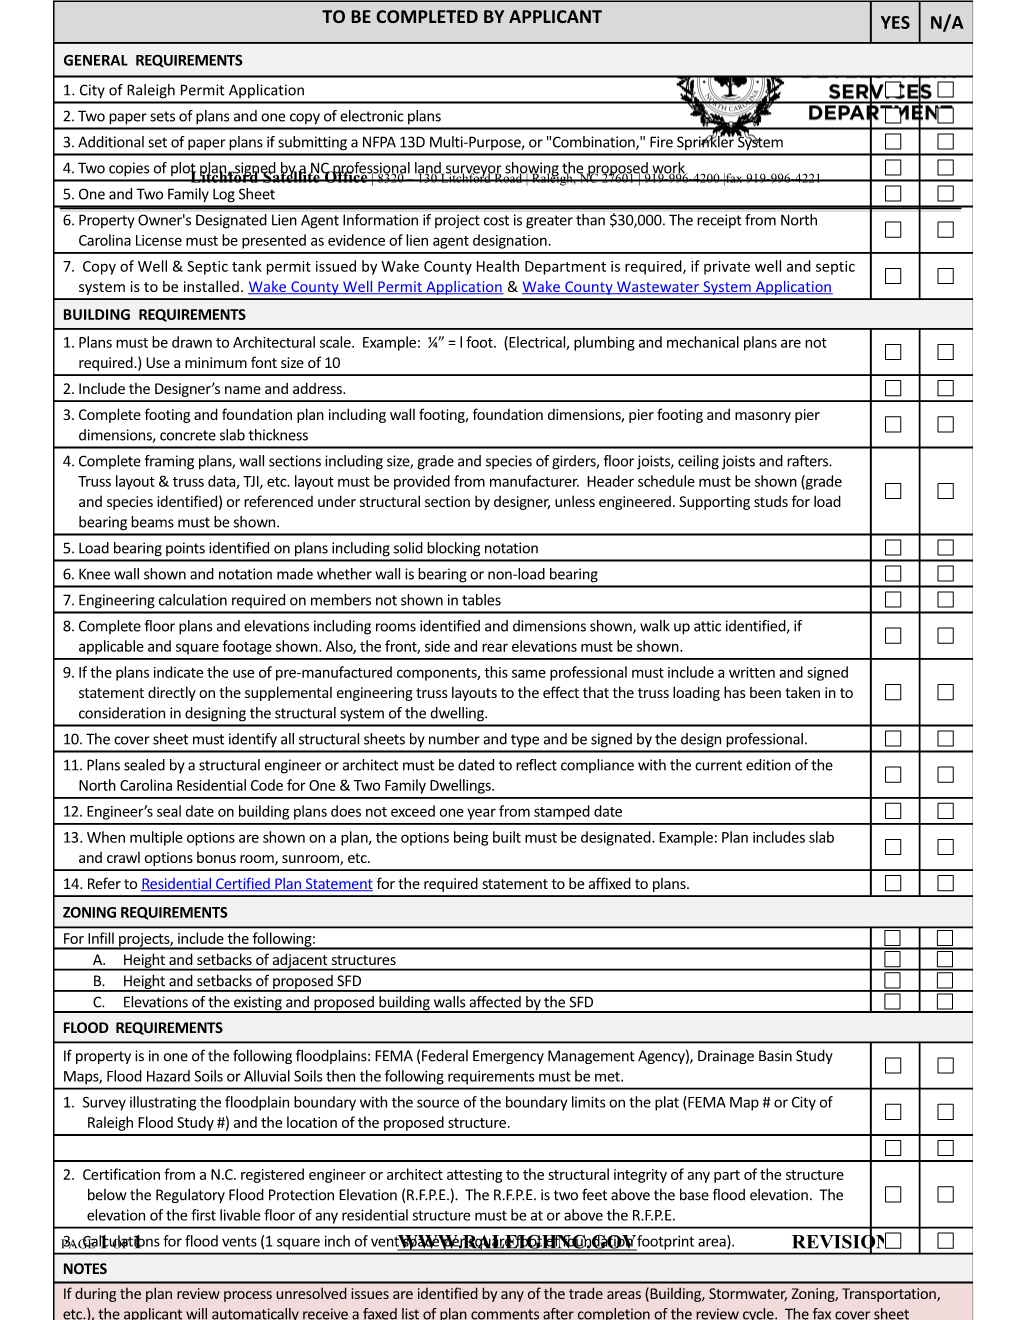 Residential Certified Review Checklist